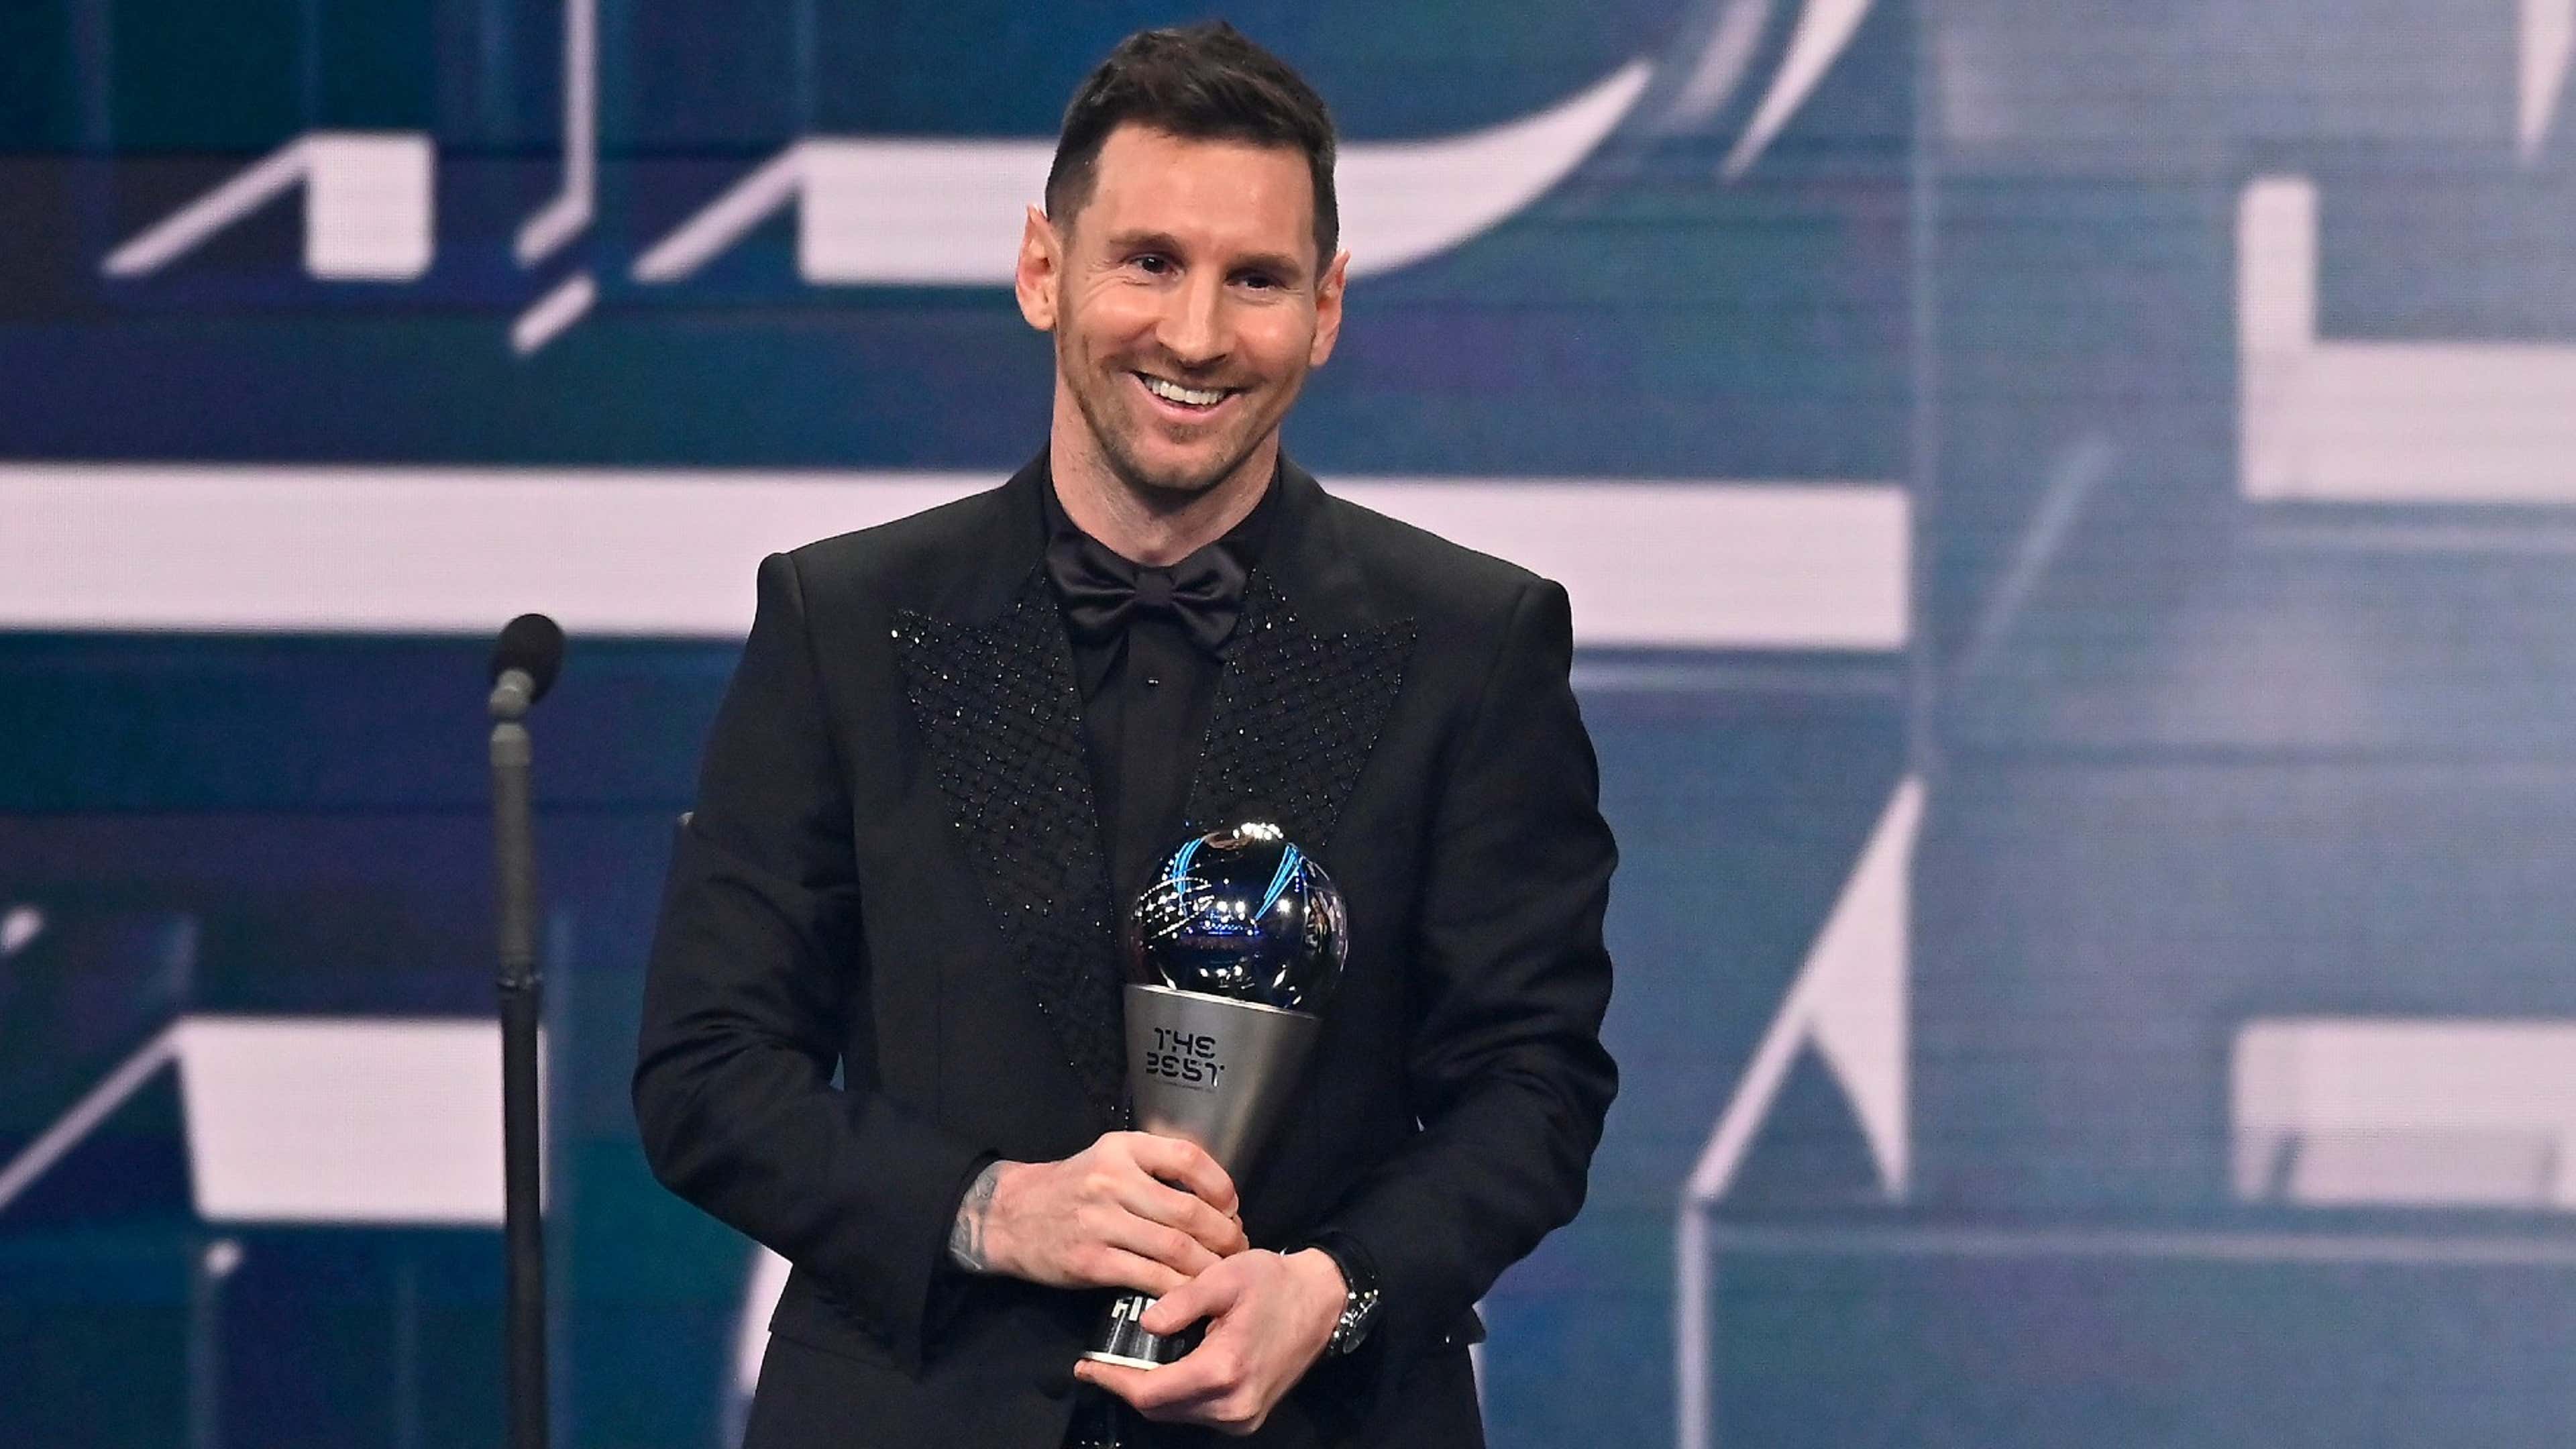 Lionel Messi crowned best men's player of 2022 at FIFA's The Best